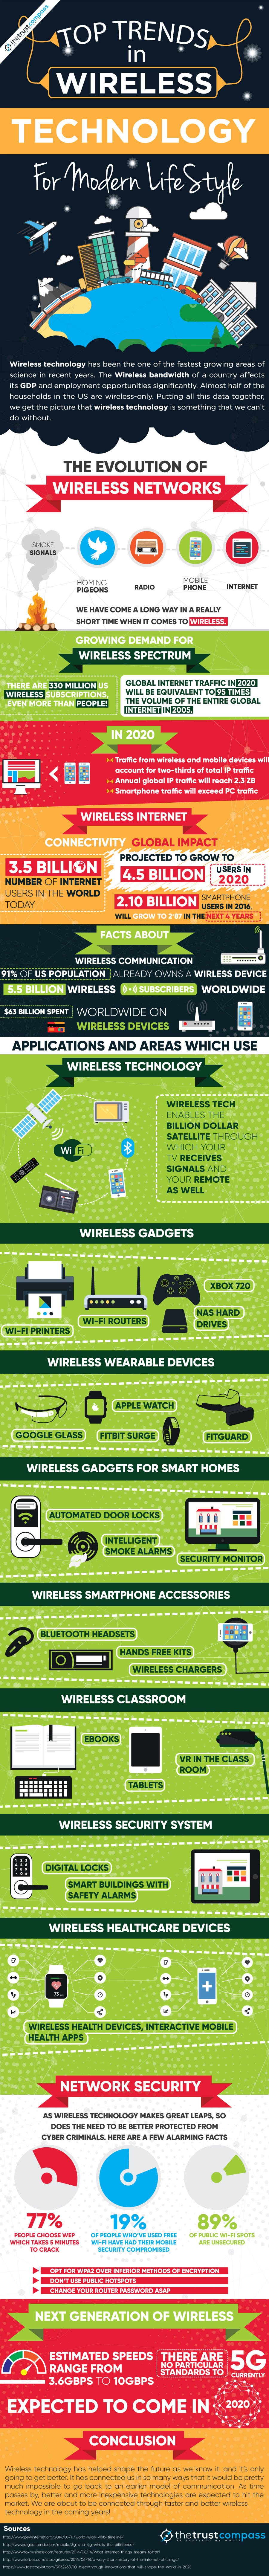 Top Trends in Wireless Technology and Communication 2018 #infographic